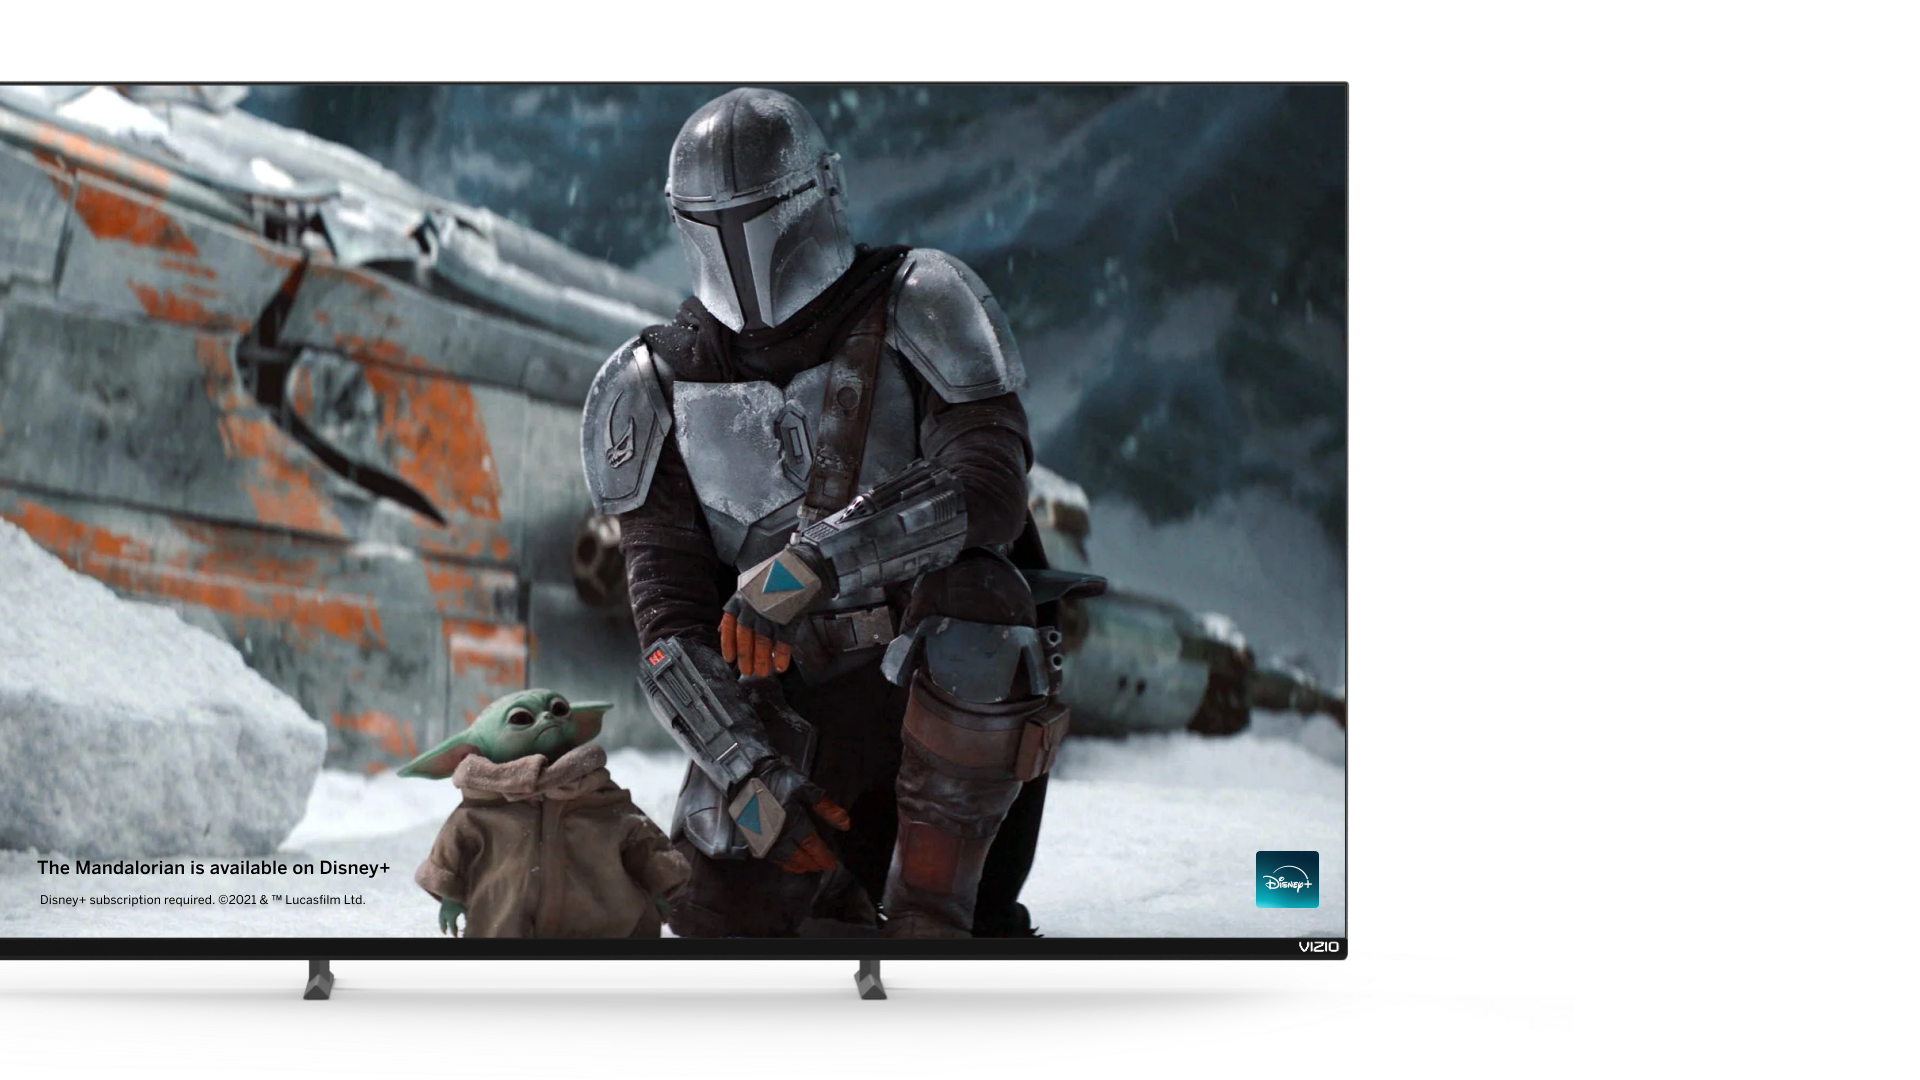 Dolby Vision Variable Refresh Rate & AMD FreeSync Gaming HDMI 2.1 HDR10+ VIZIO 65-Inch M-Series Quantum 4K UHD LED HDR Smart TV with Apple AirPlay and Chromecast Built-in 